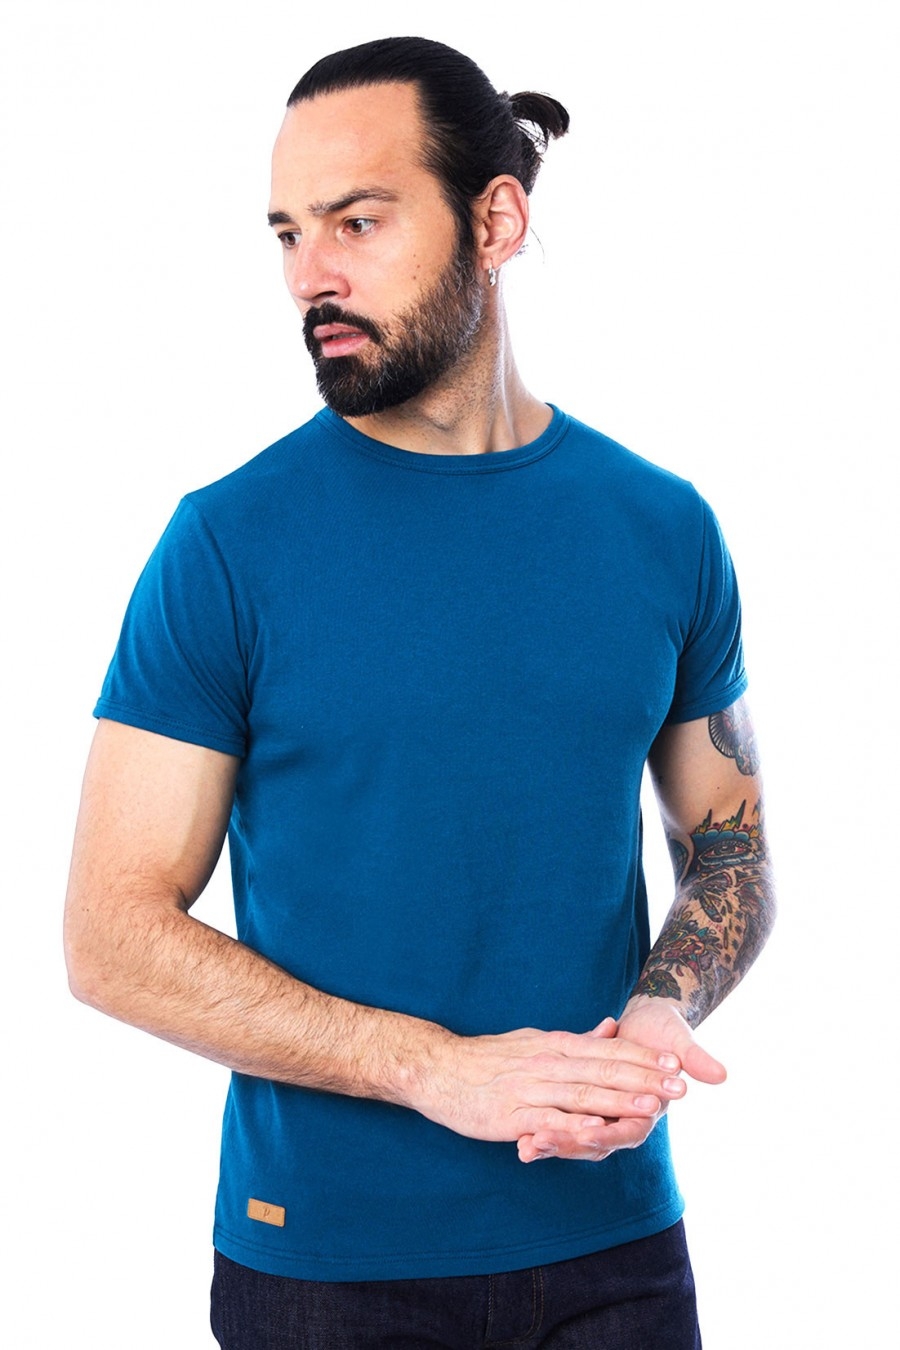 T-SHIRT HOMME MANCHE COURTE COL ROND BLEU CANARD - Made in France & 100% Recyclé